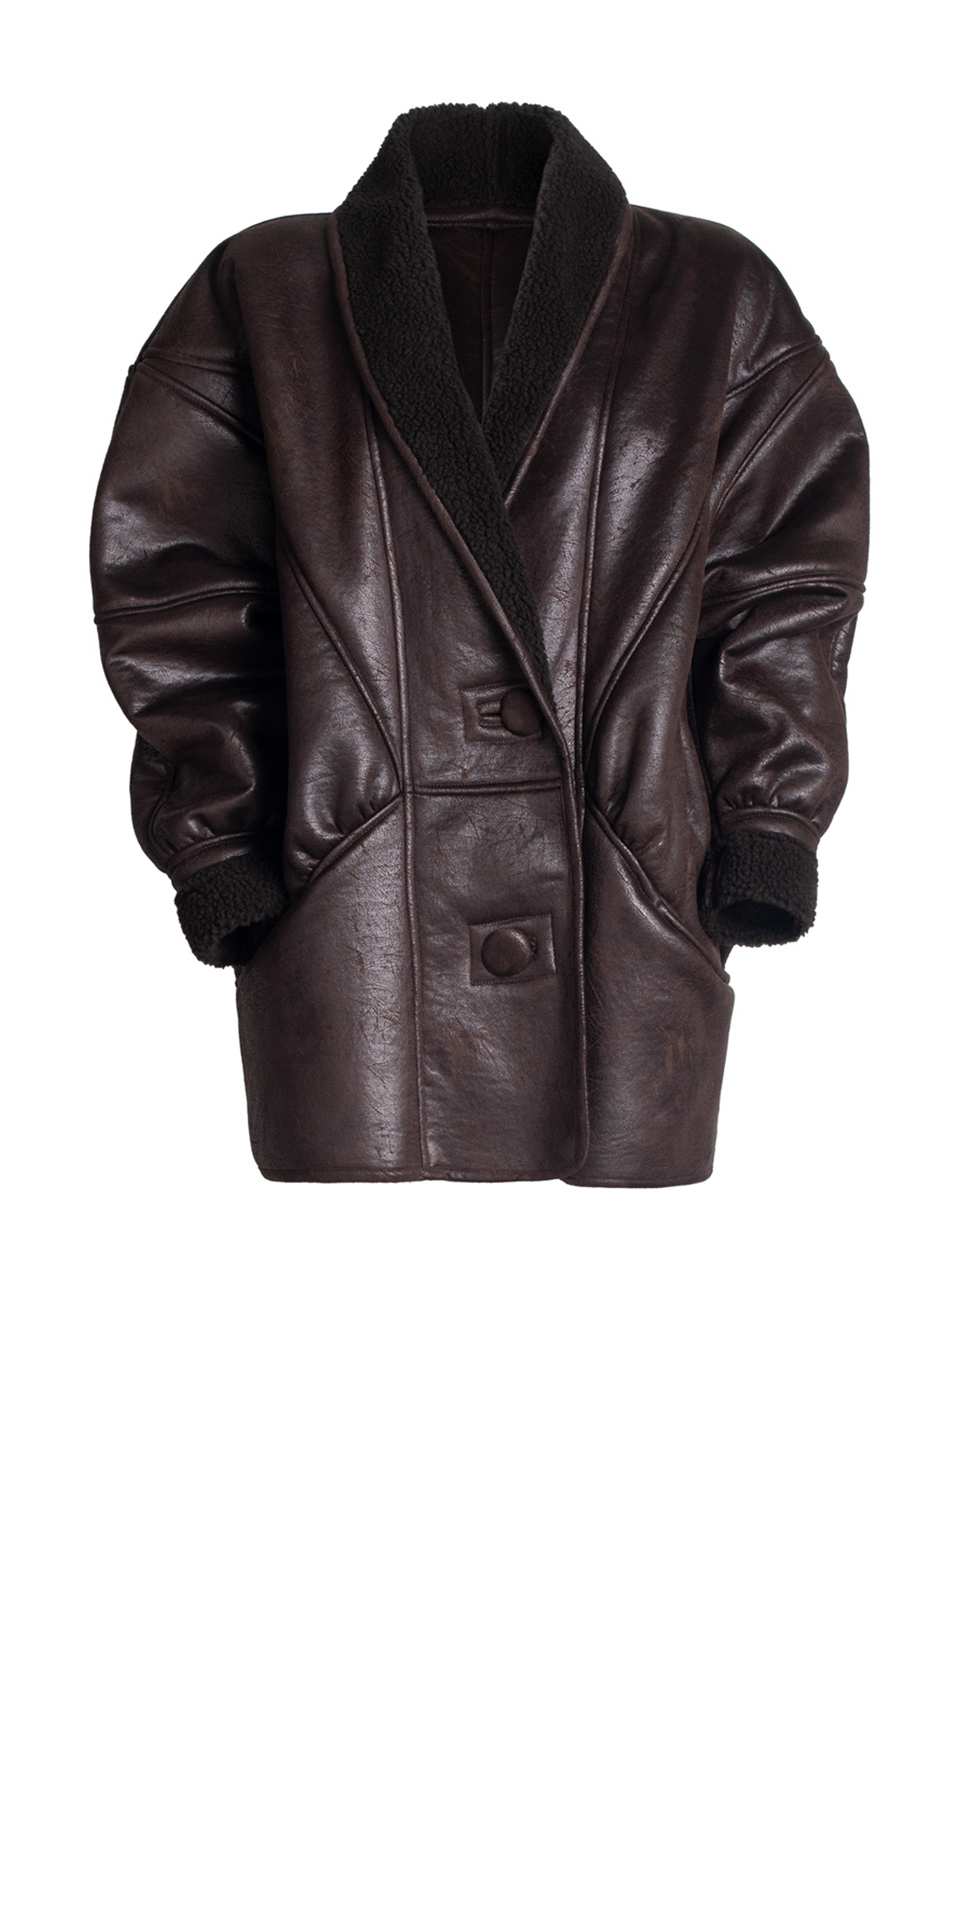 THE CLASSIC SHEARLING BROWN